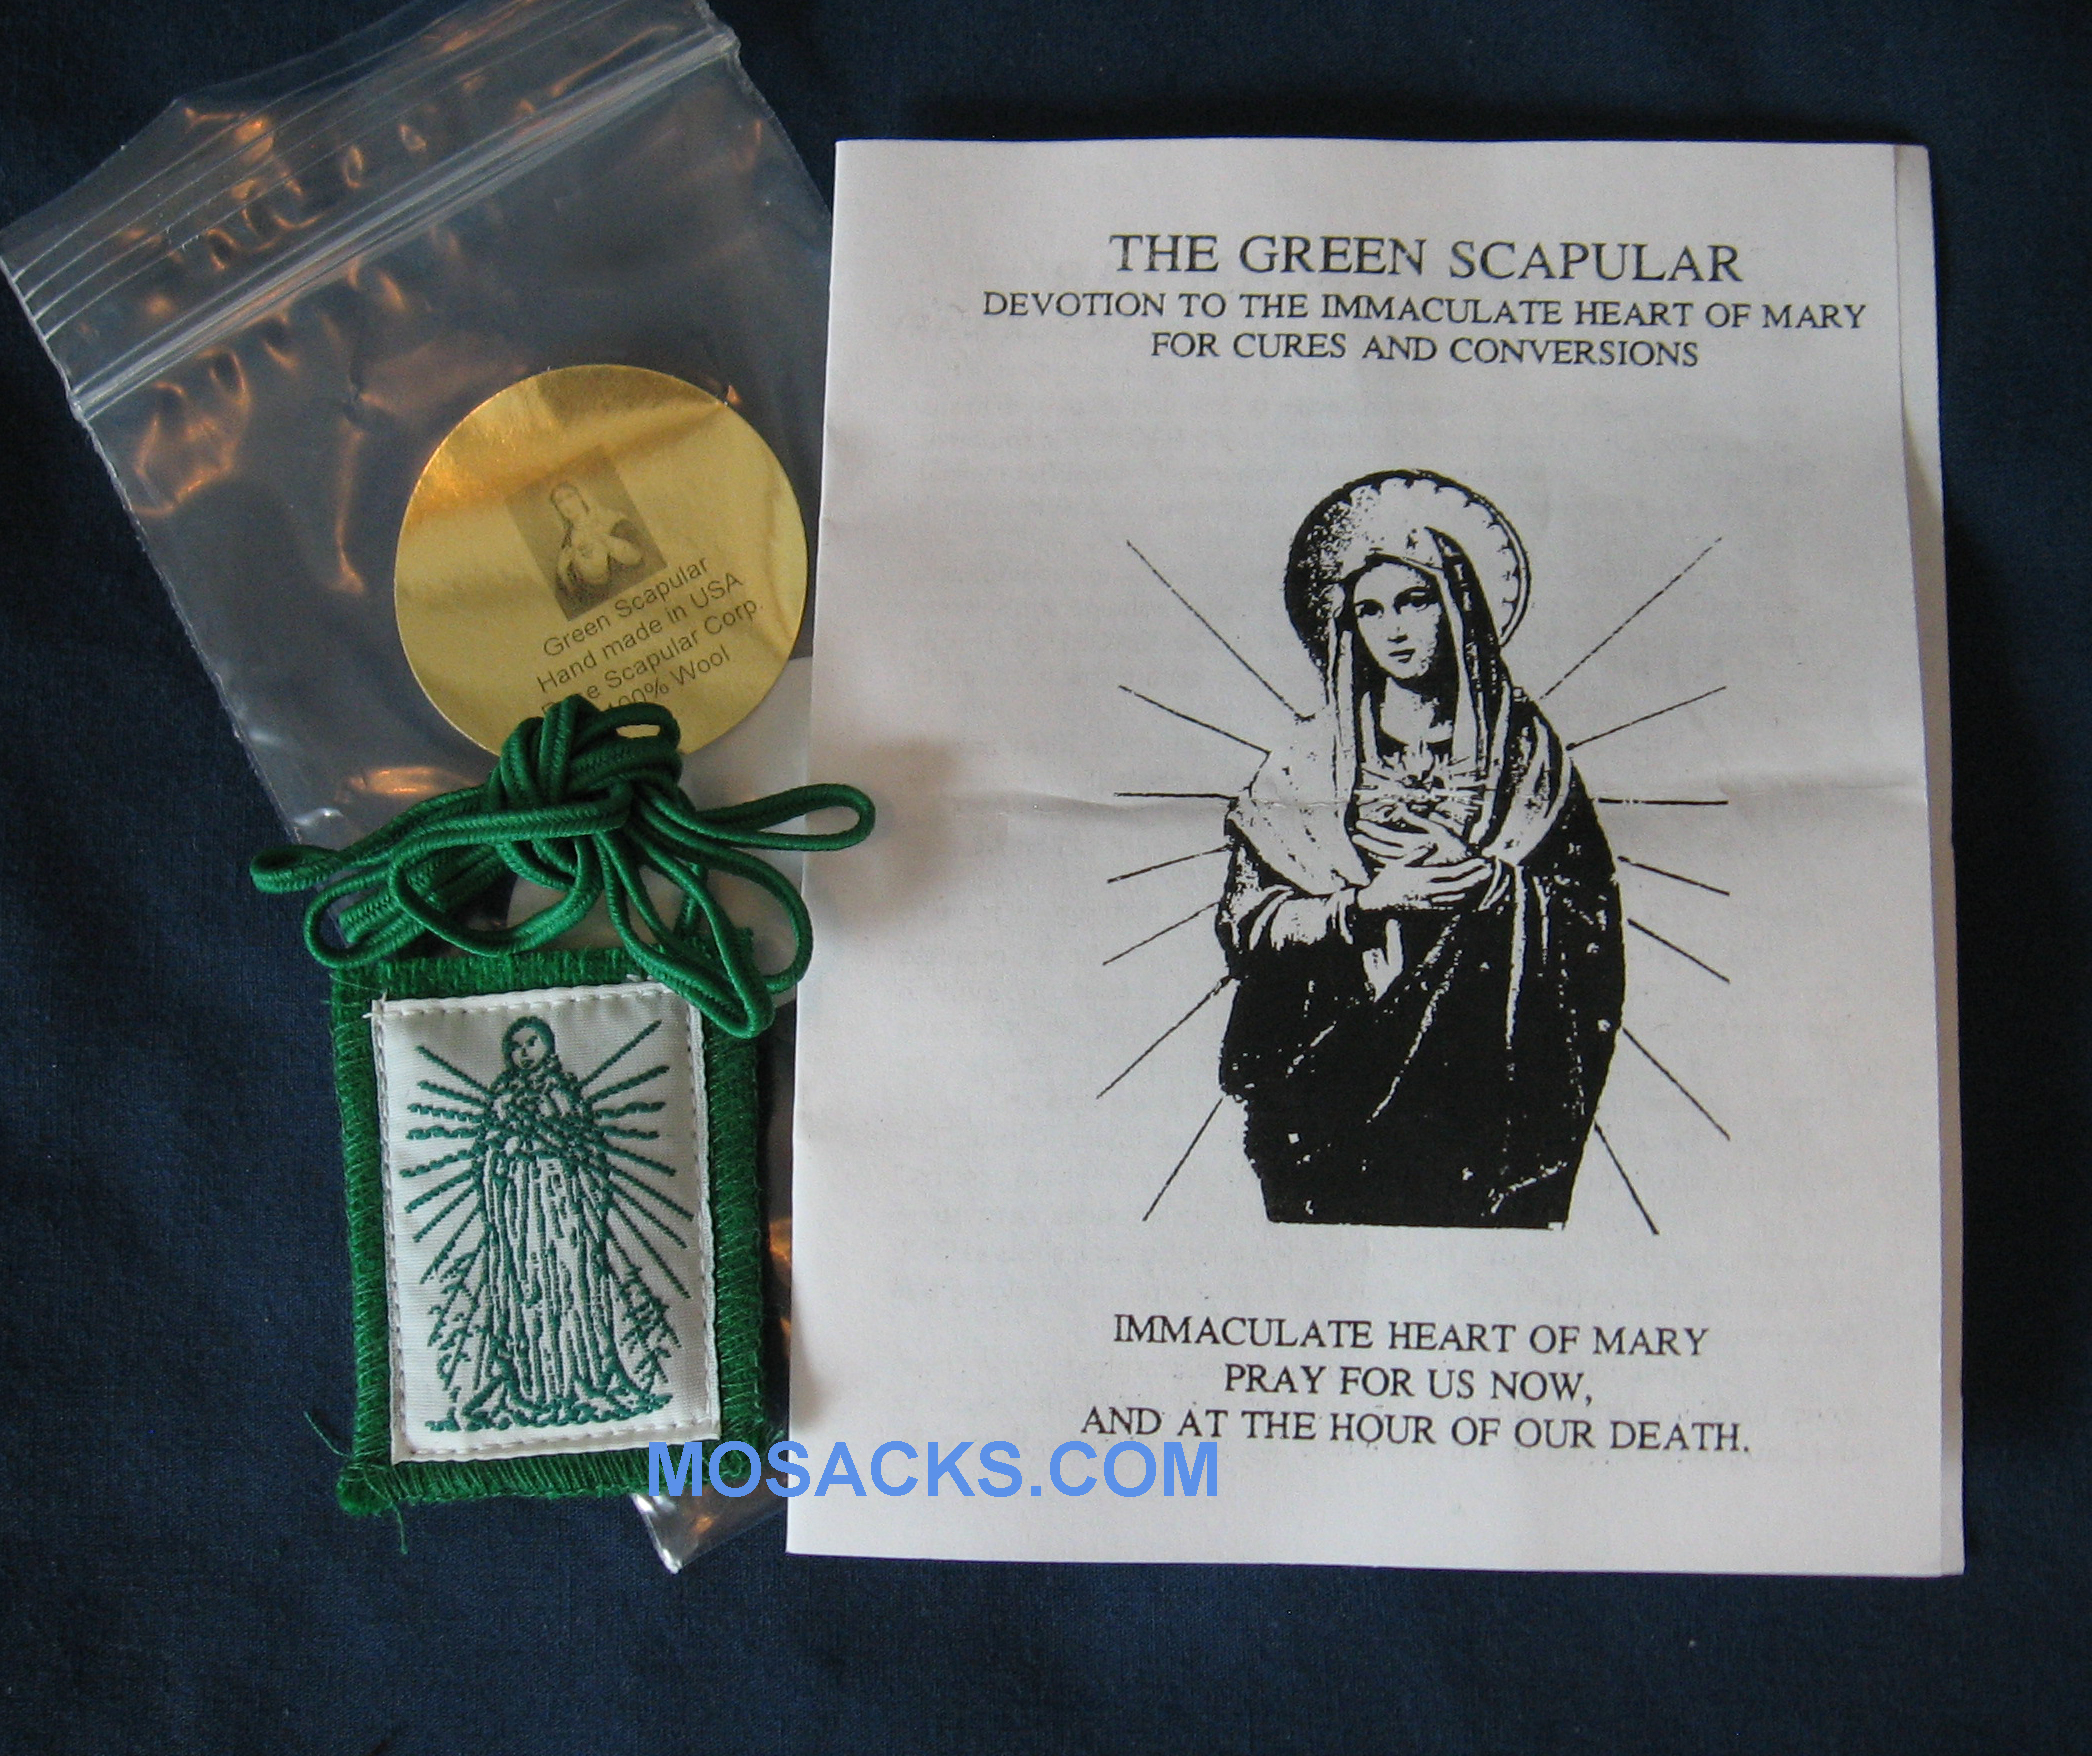 Scapular Immaculate Heart of Mary 1x2 inch Wool